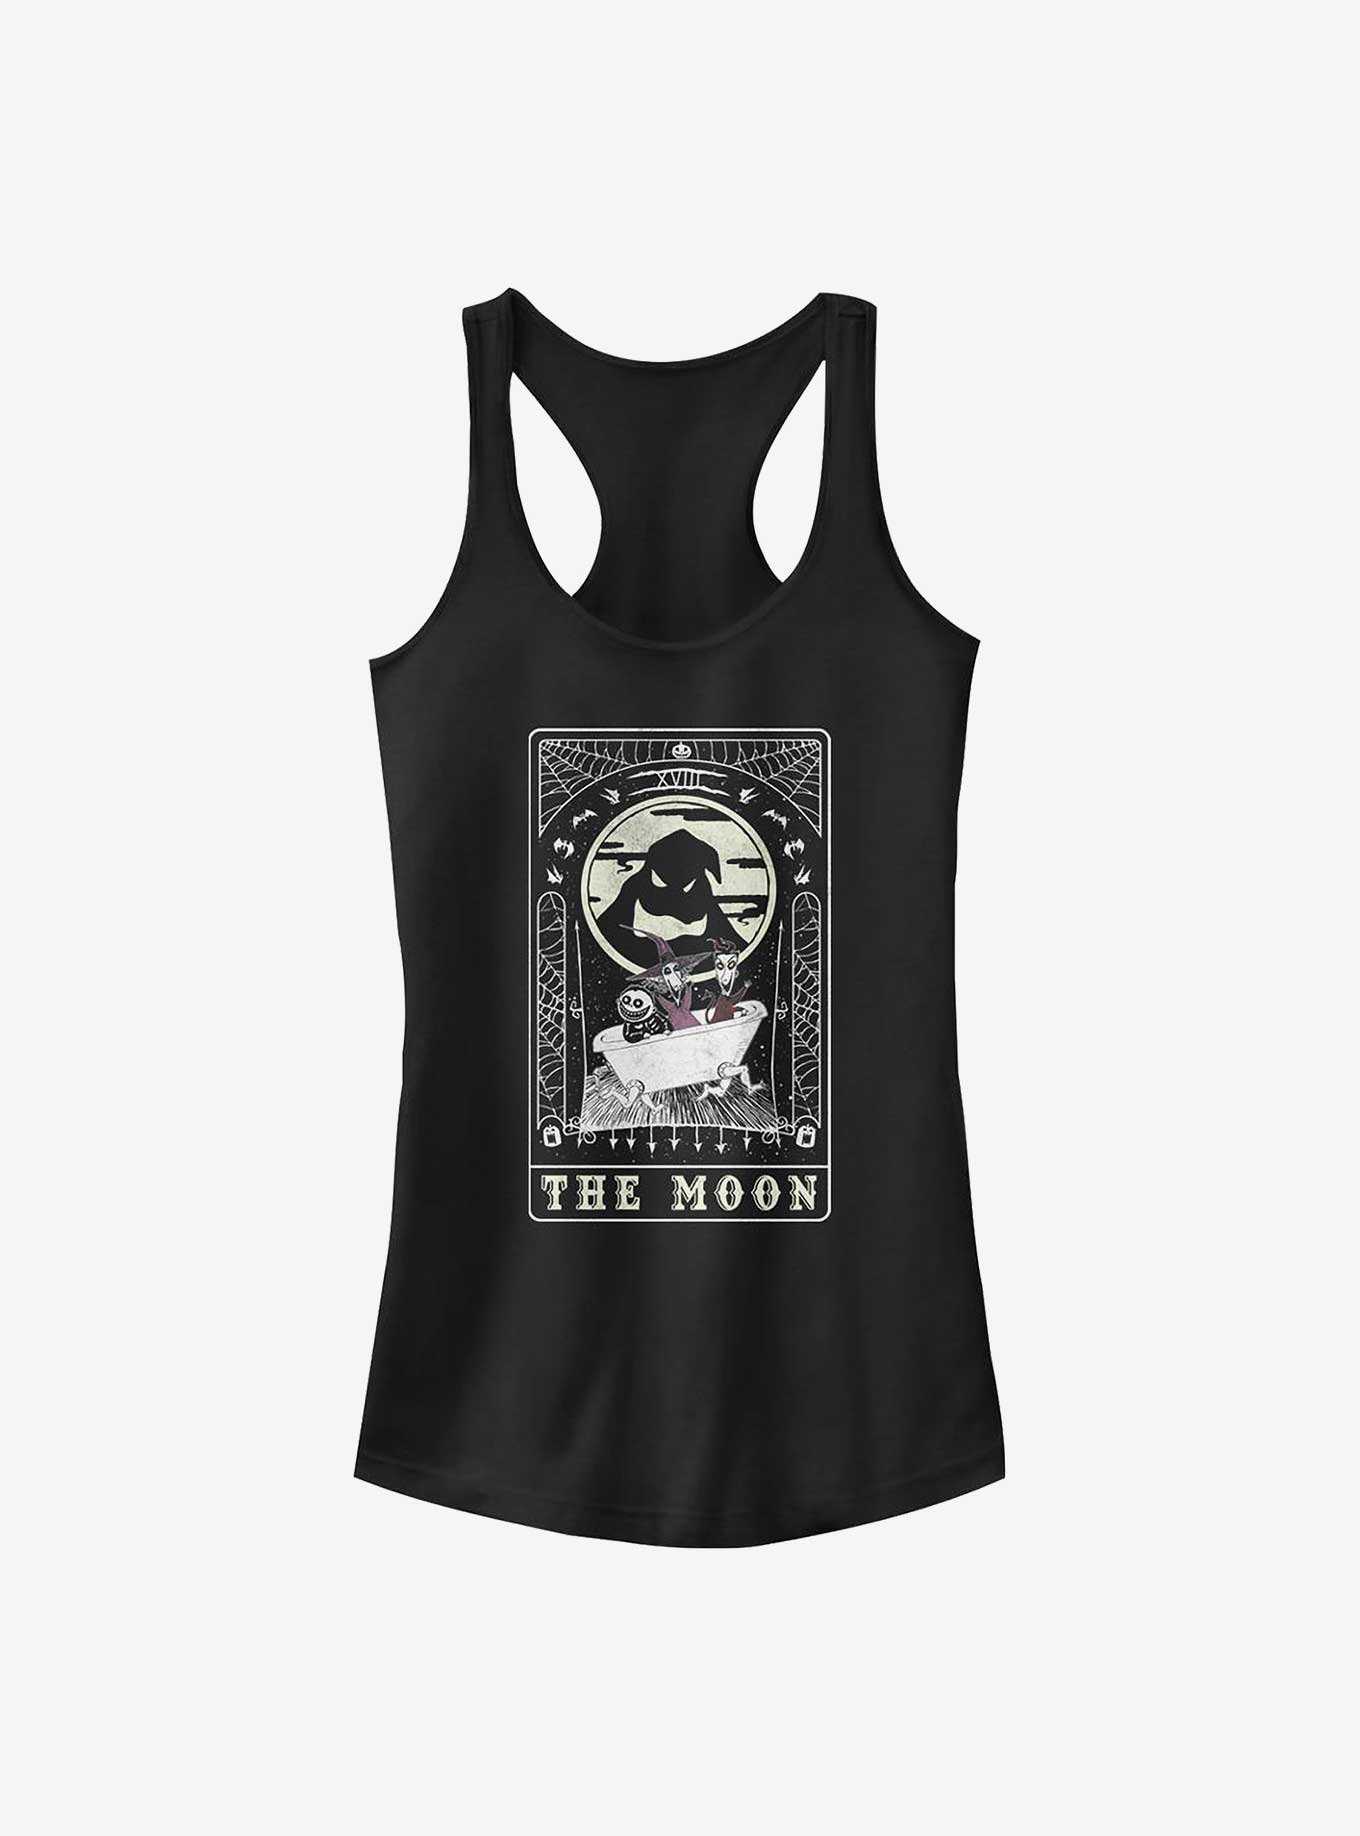 The Nightmare Before Christmas Oogie Boogie The Moon Tarot Tank Top, , hi-res